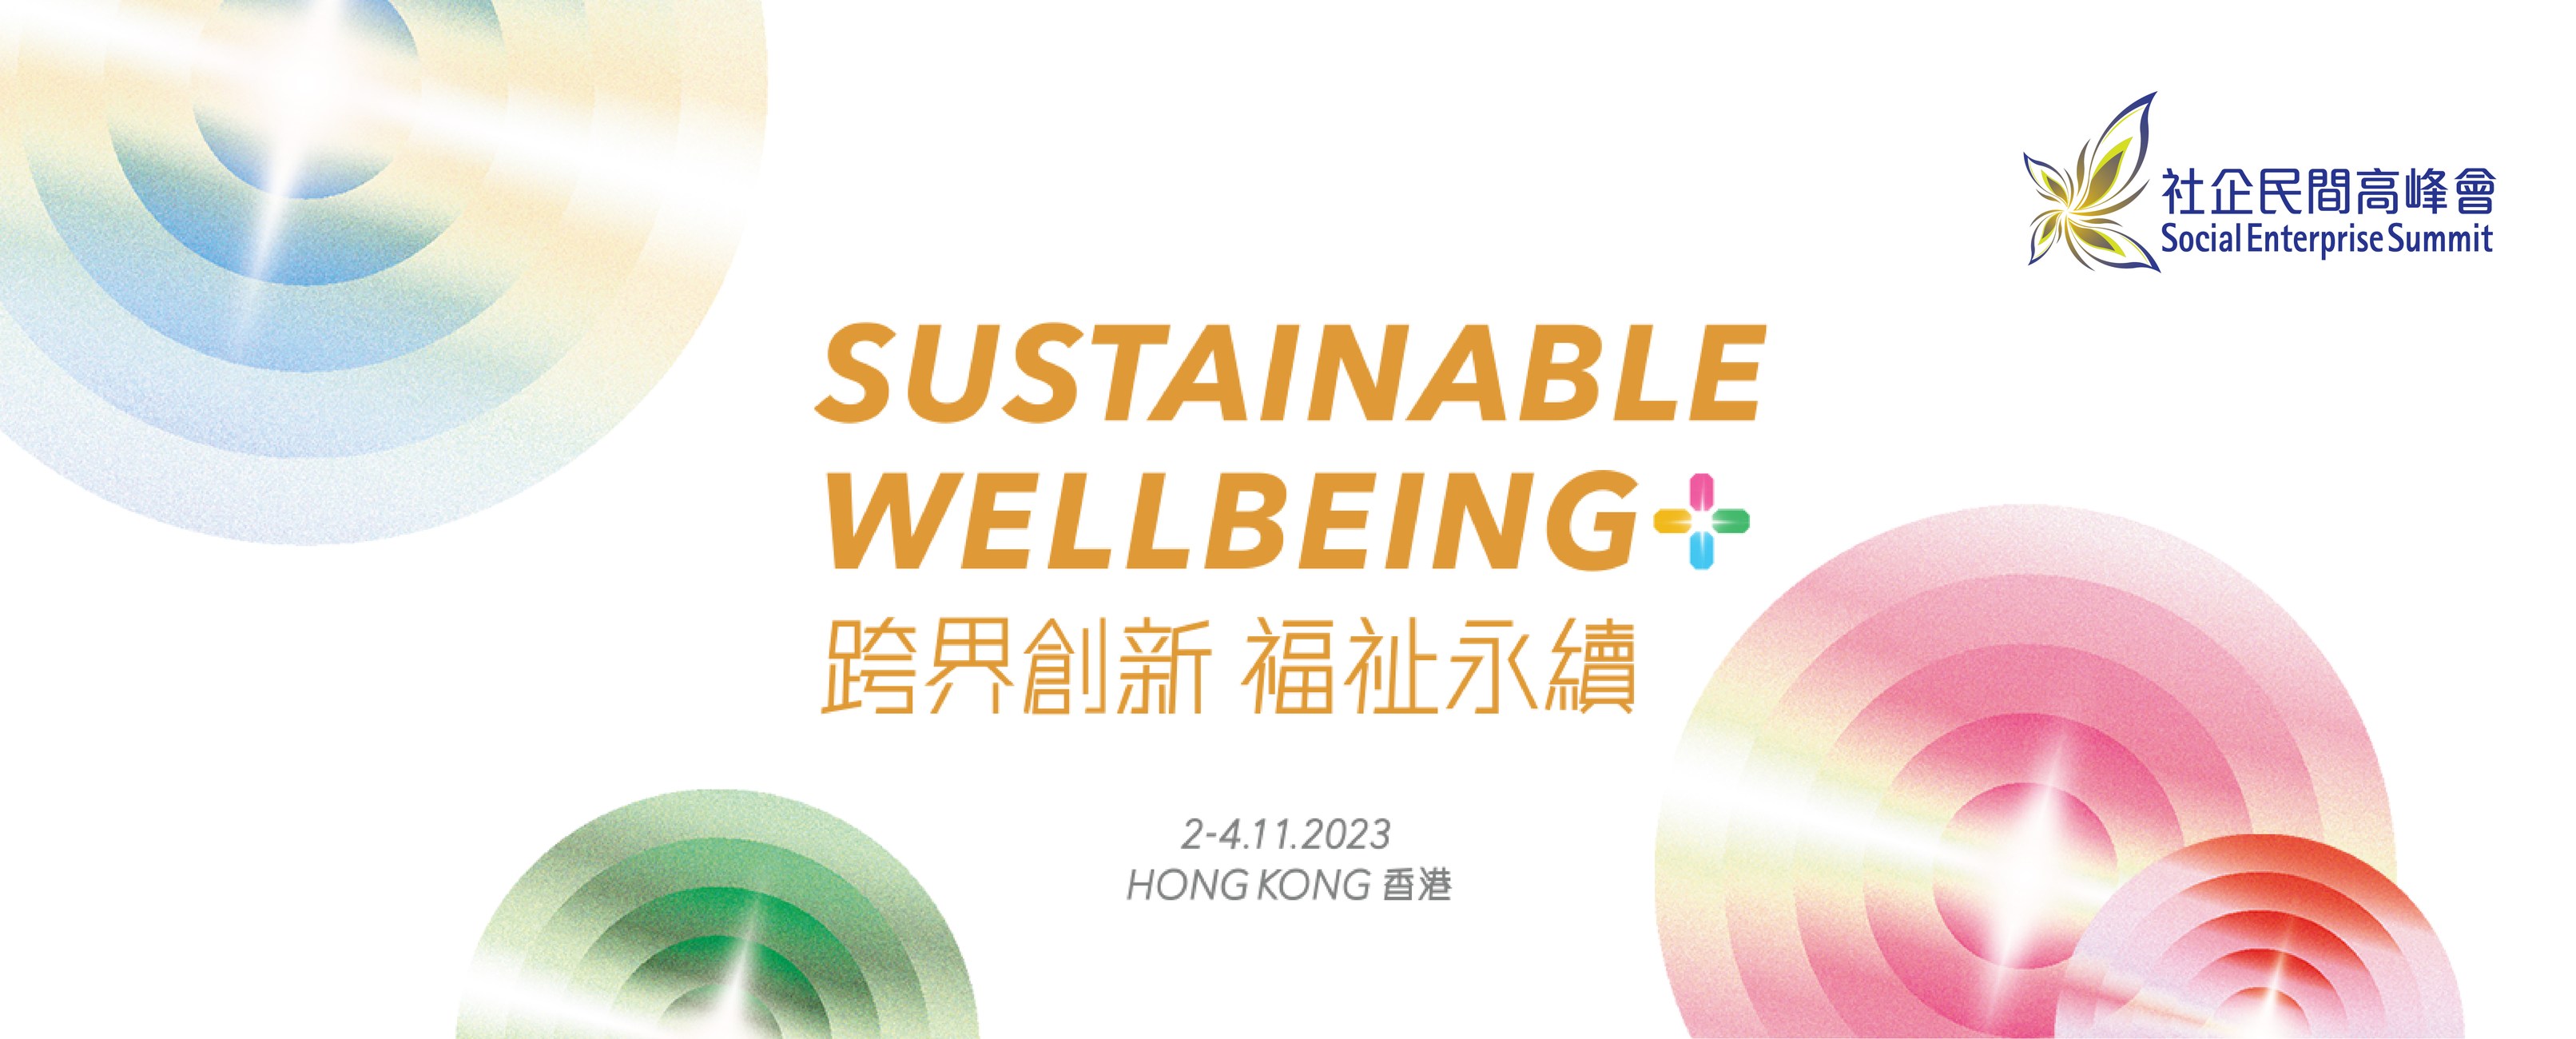 Supporting Event - Social Enterprise Summit 2023 ― Sustainable Wellbeing+